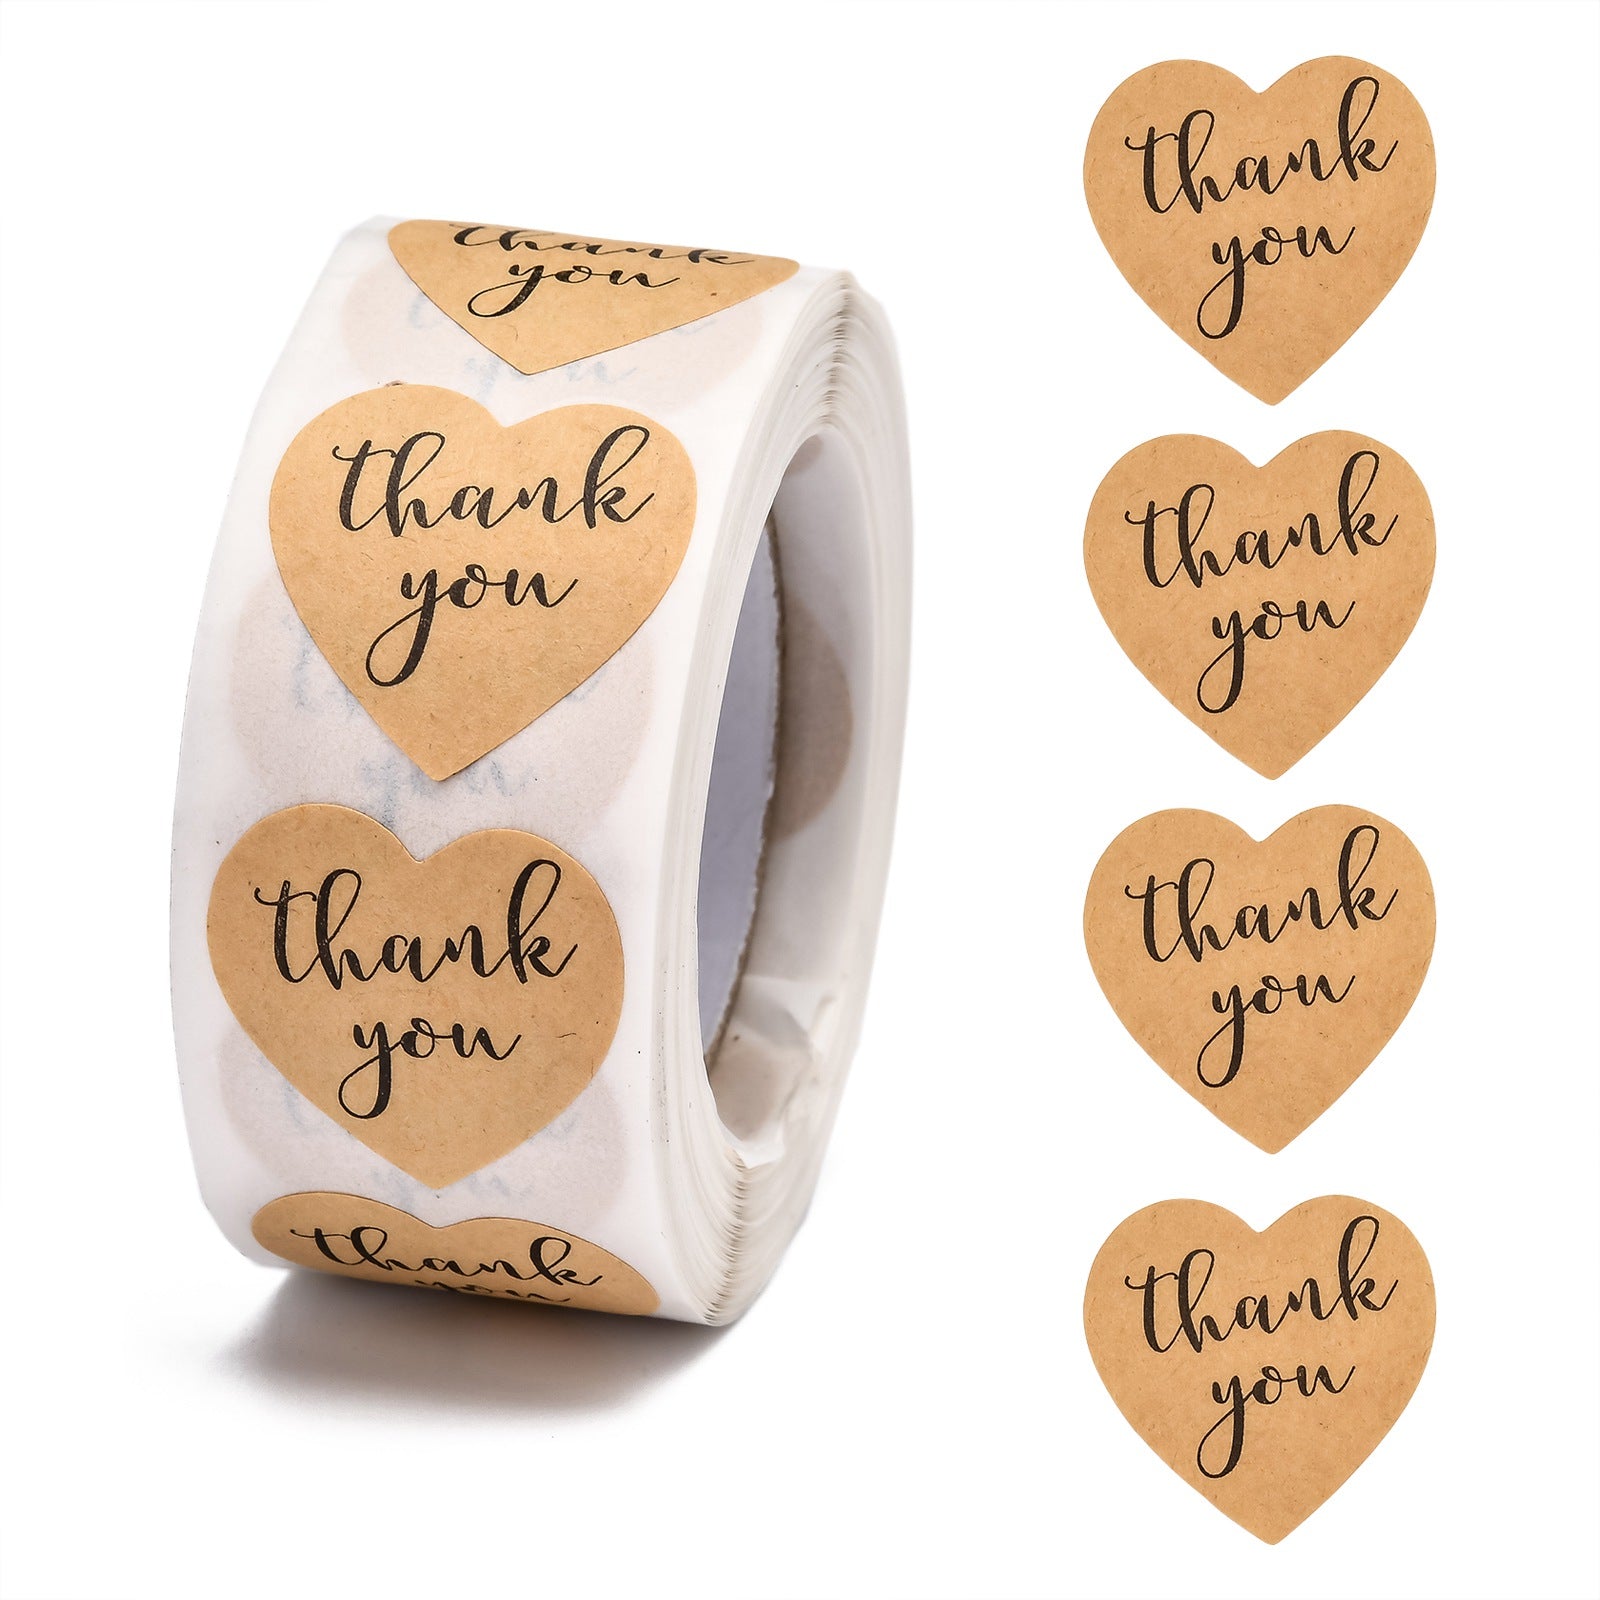 Globleland 1 Inch Thank You Stickers, Self-Adhesive Kraft Paper Gift Tag Stickers, Adhesive Labels, Heart Shape, Tan, Heart: 25x25mm, 500pcs/roll